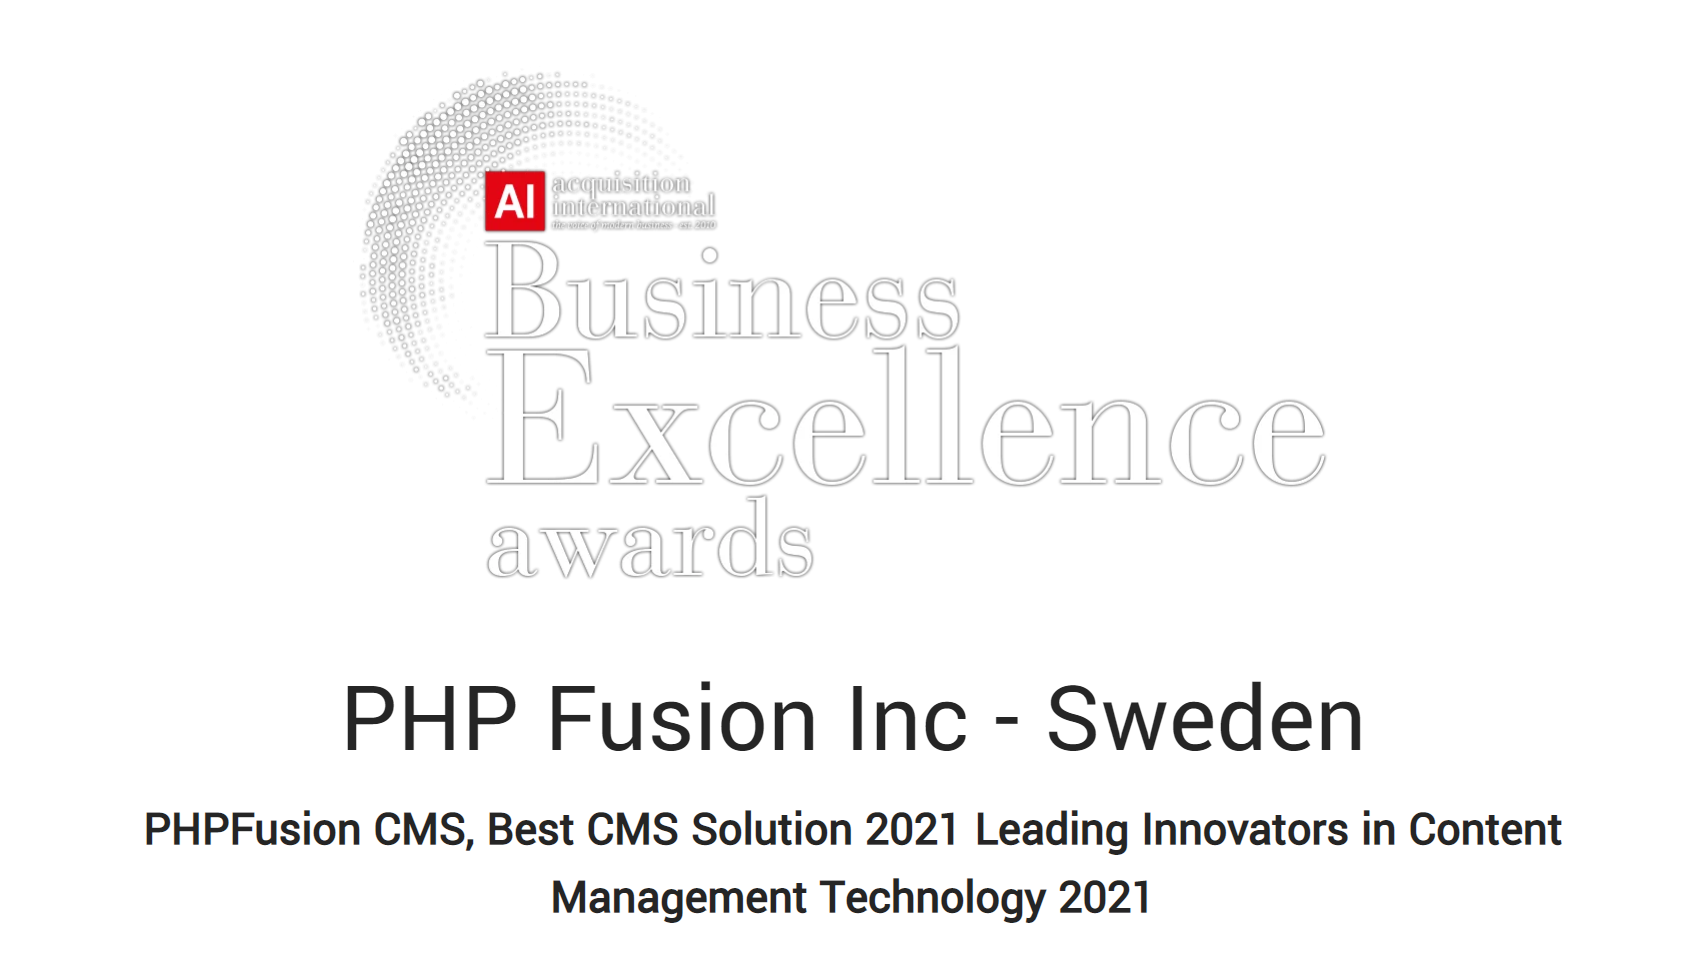 Best CMS Solution 2021 - <span class="fusion-highlight">PHPFusion</span>